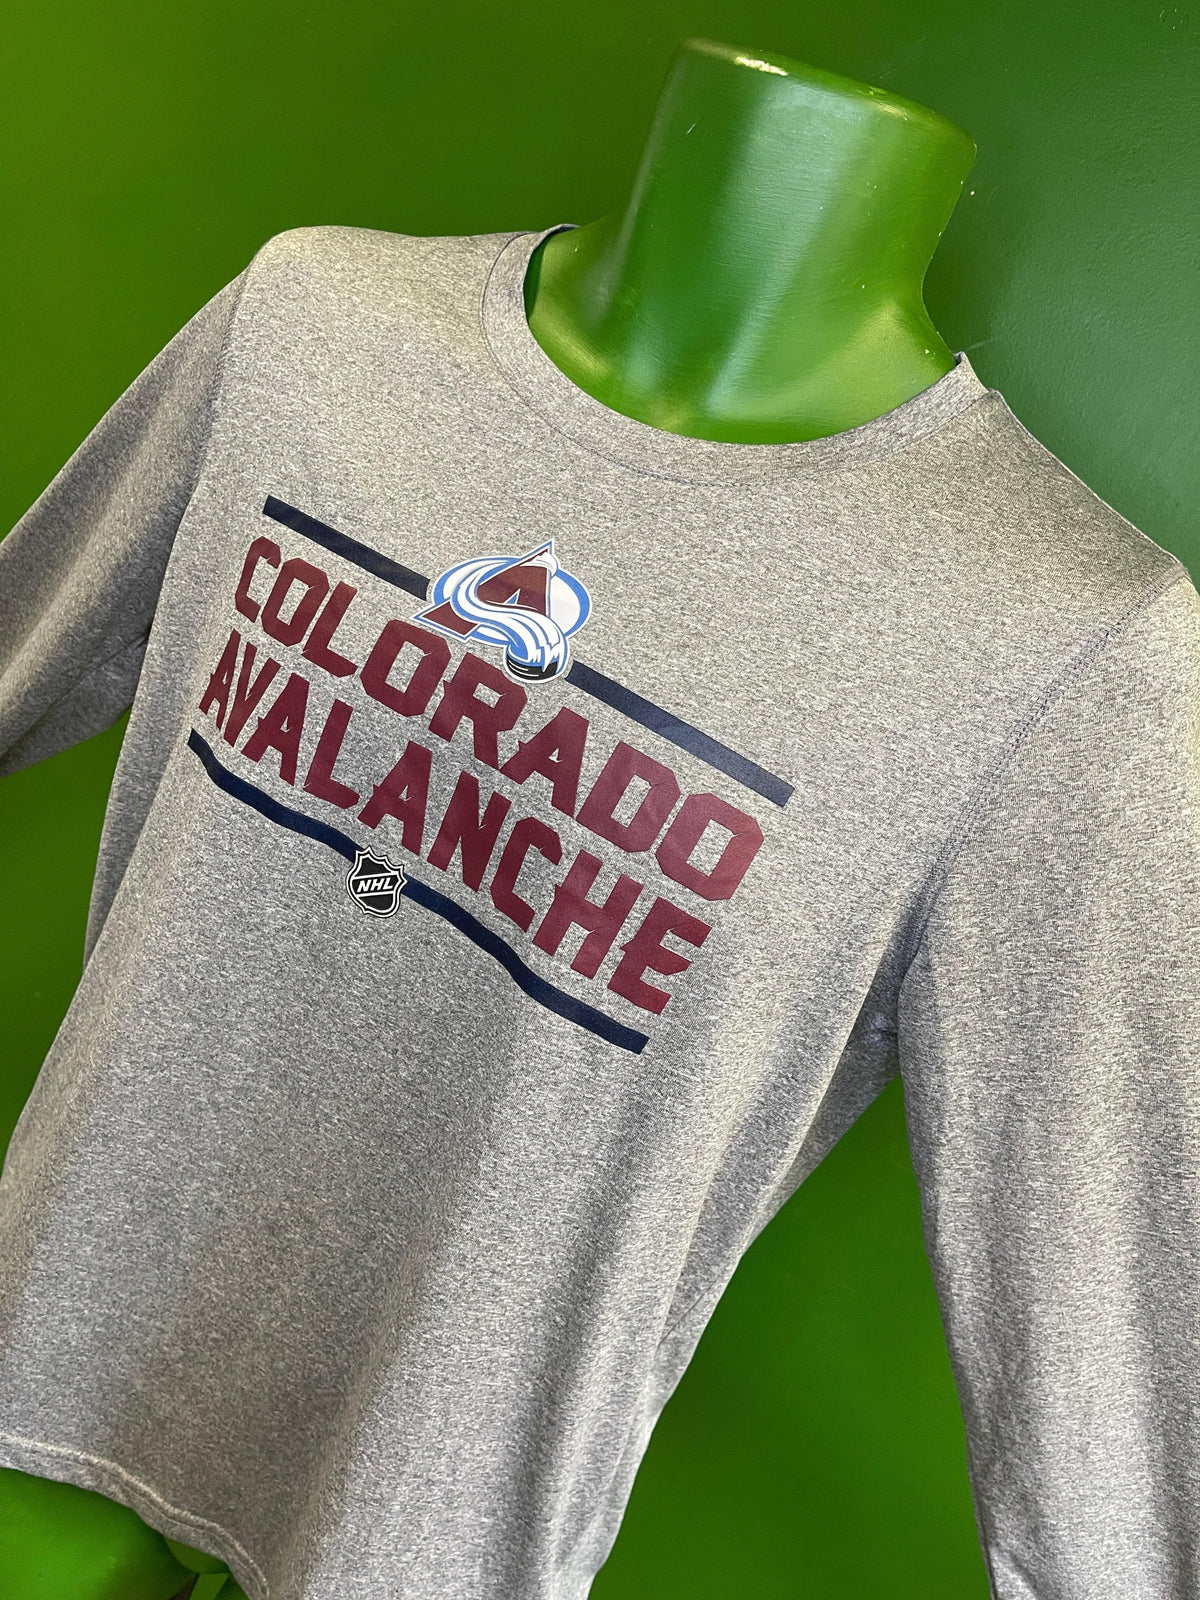 NHL Colorado Avalanche L/S Heathered Grey T-Shirt Youth Large 14-16